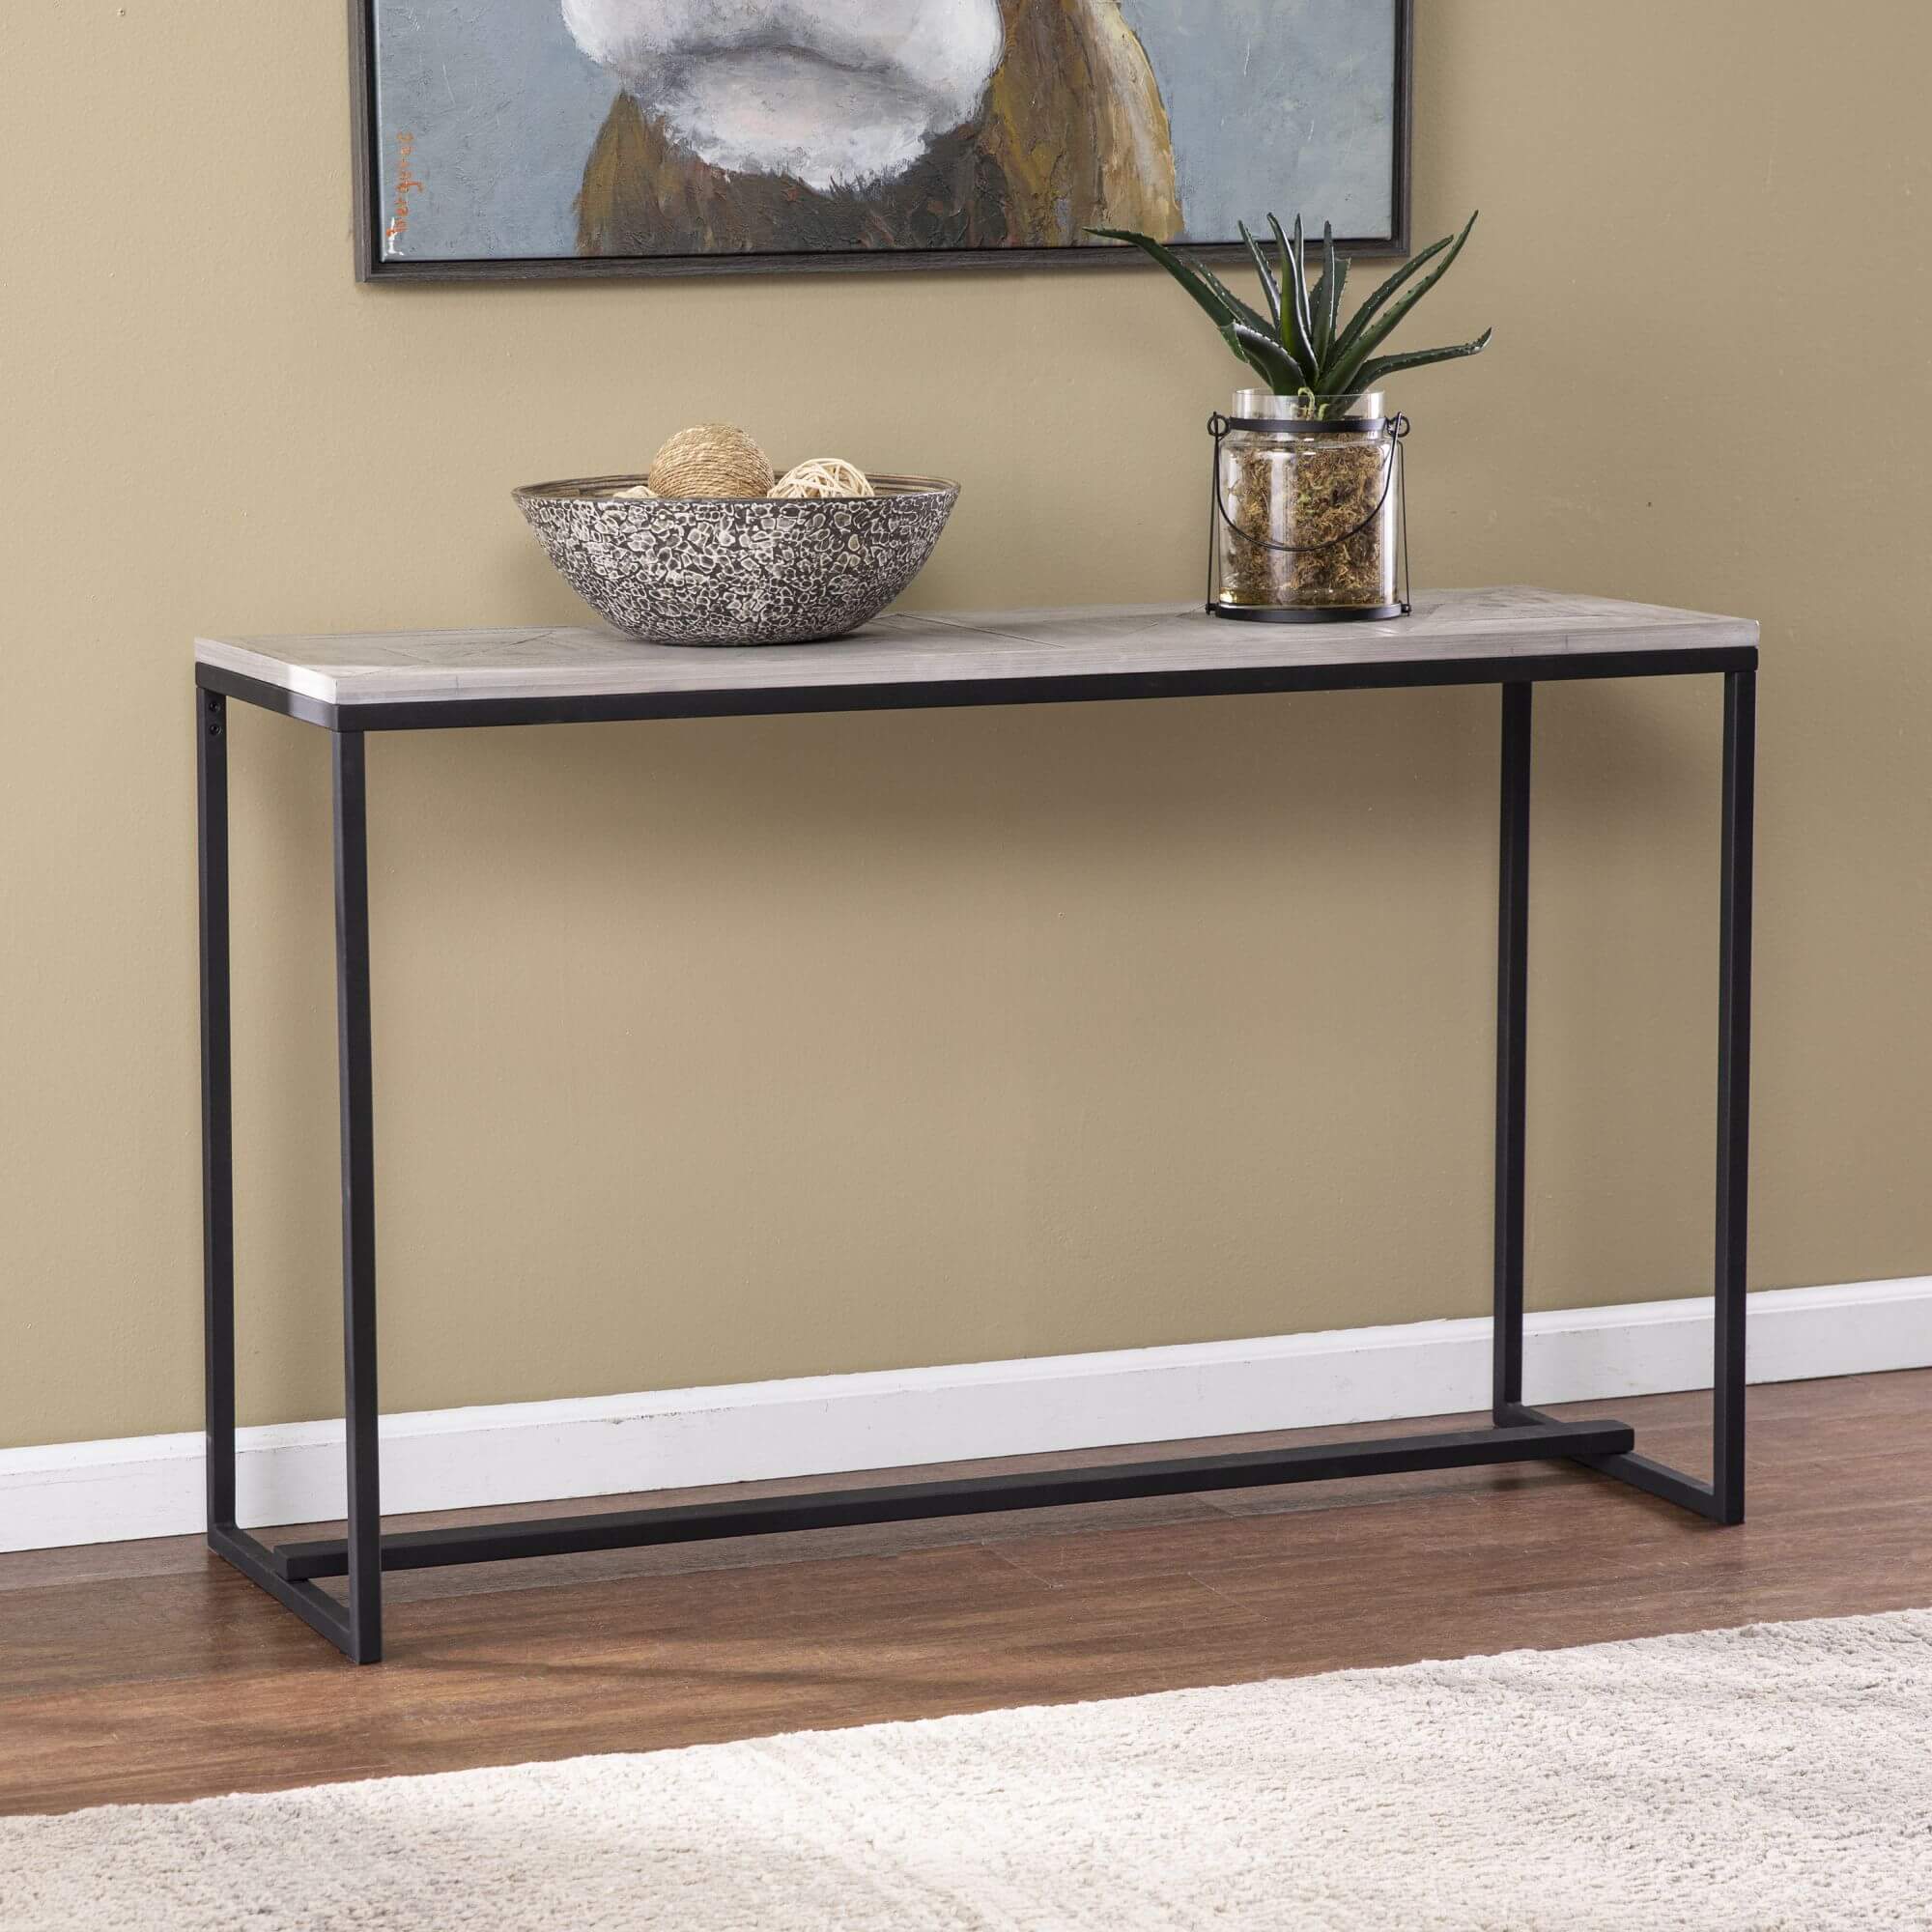 Sharnbrook Long Reclaimed Wood Console Table